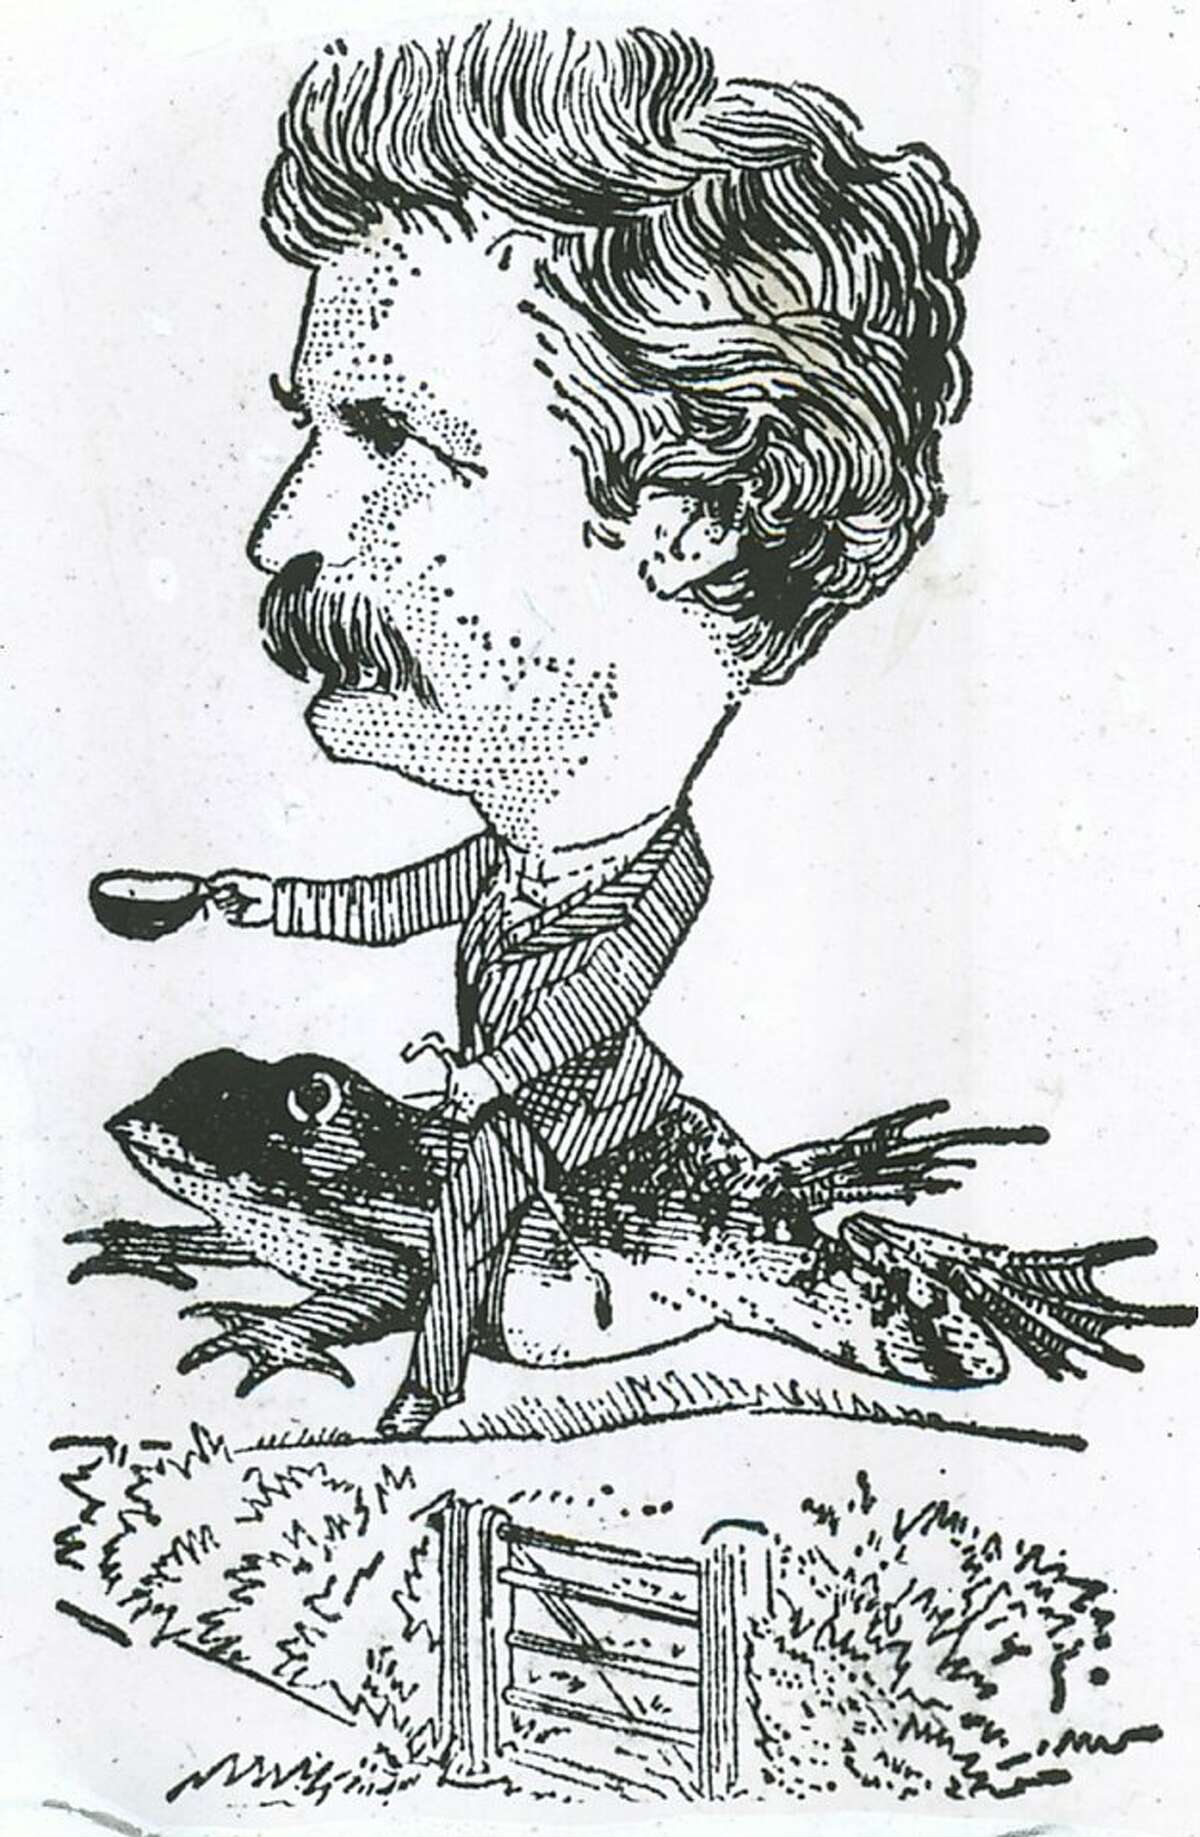 Insight02_KOMP.jpg This illustration of Mark Twain's celebrated jumping frog of Calavaras County appeared in the N.Y. Herald Tribune /San Francisco Chronicle